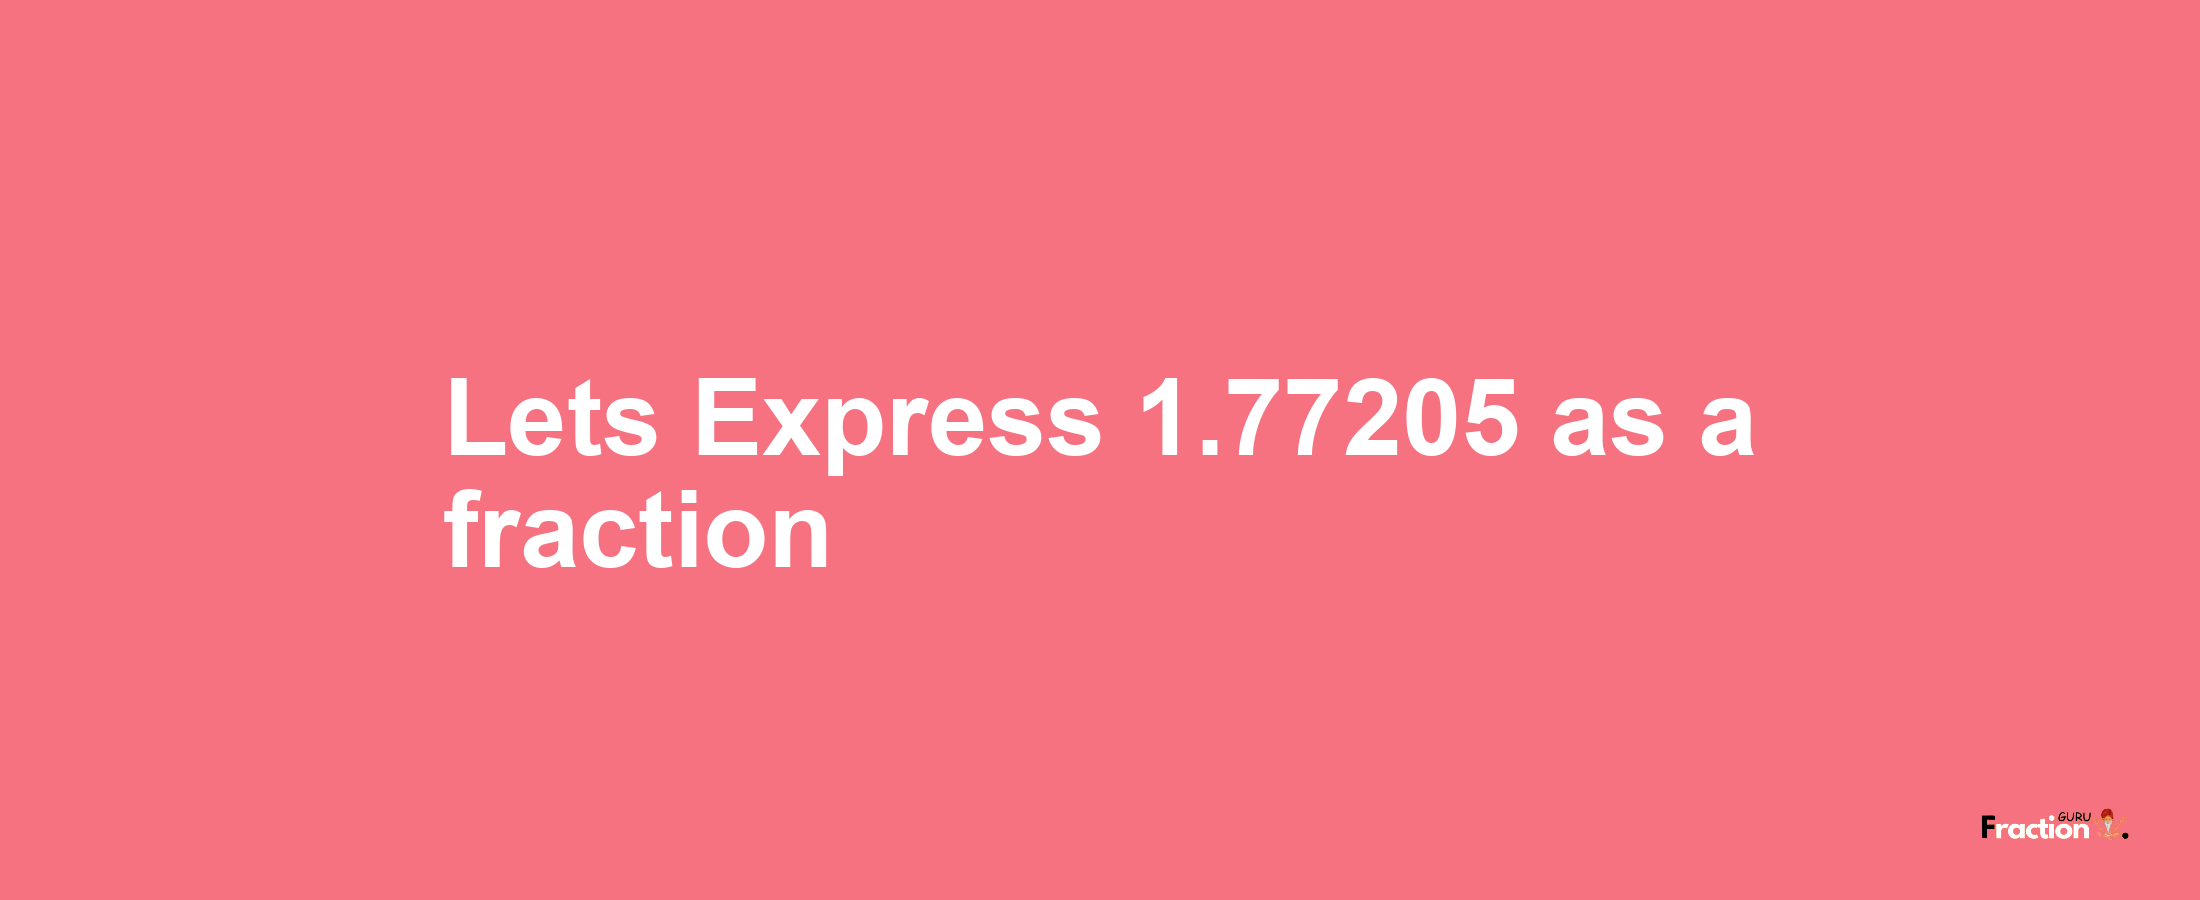 Lets Express 1.77205 as afraction